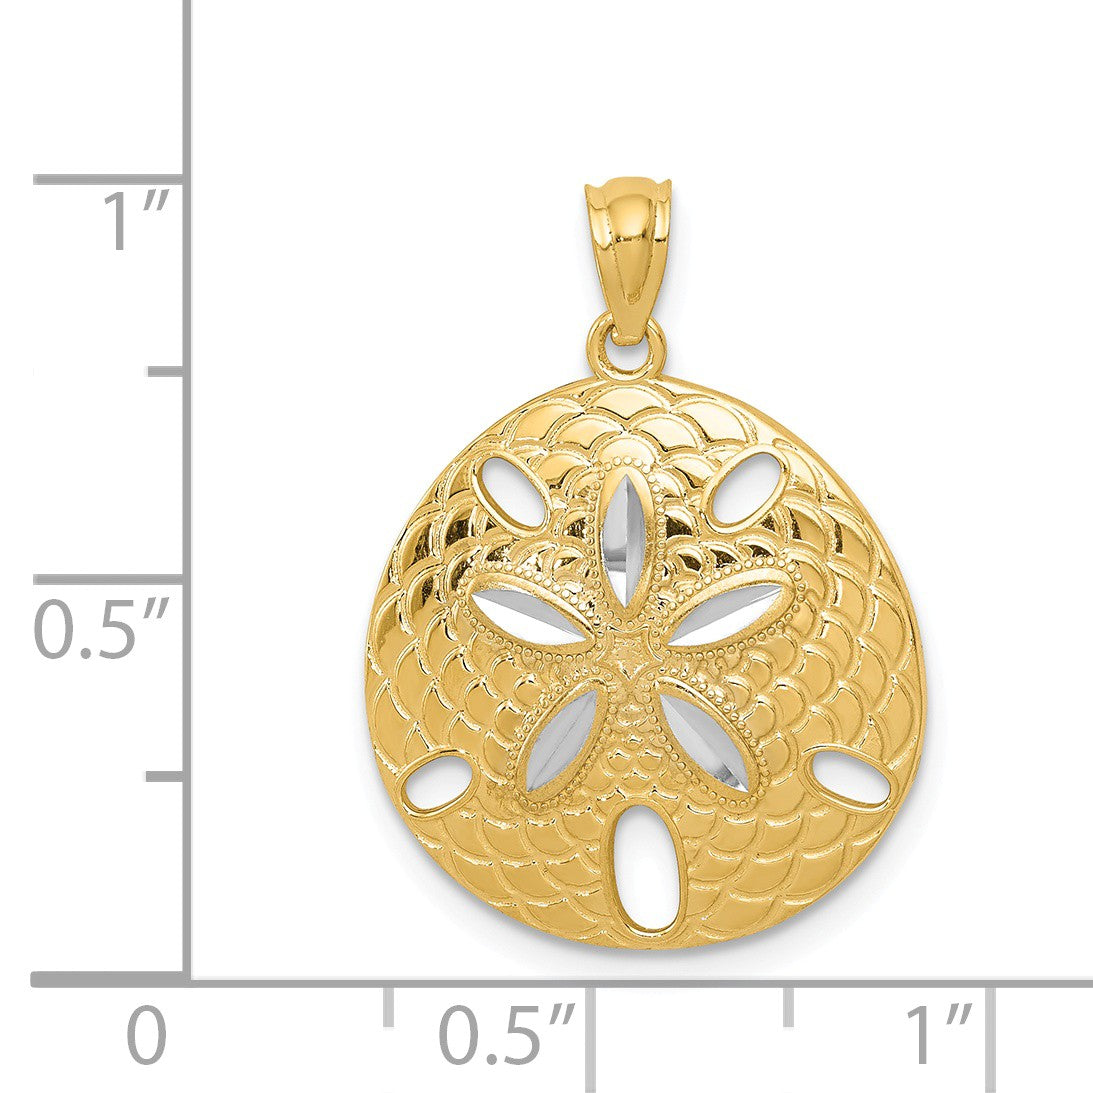 Alternate view of the 14k Yellow Gold and White Rhodium Sand Dollar Pendant, 19mm (3/4 Inch) by The Black Bow Jewelry Co.